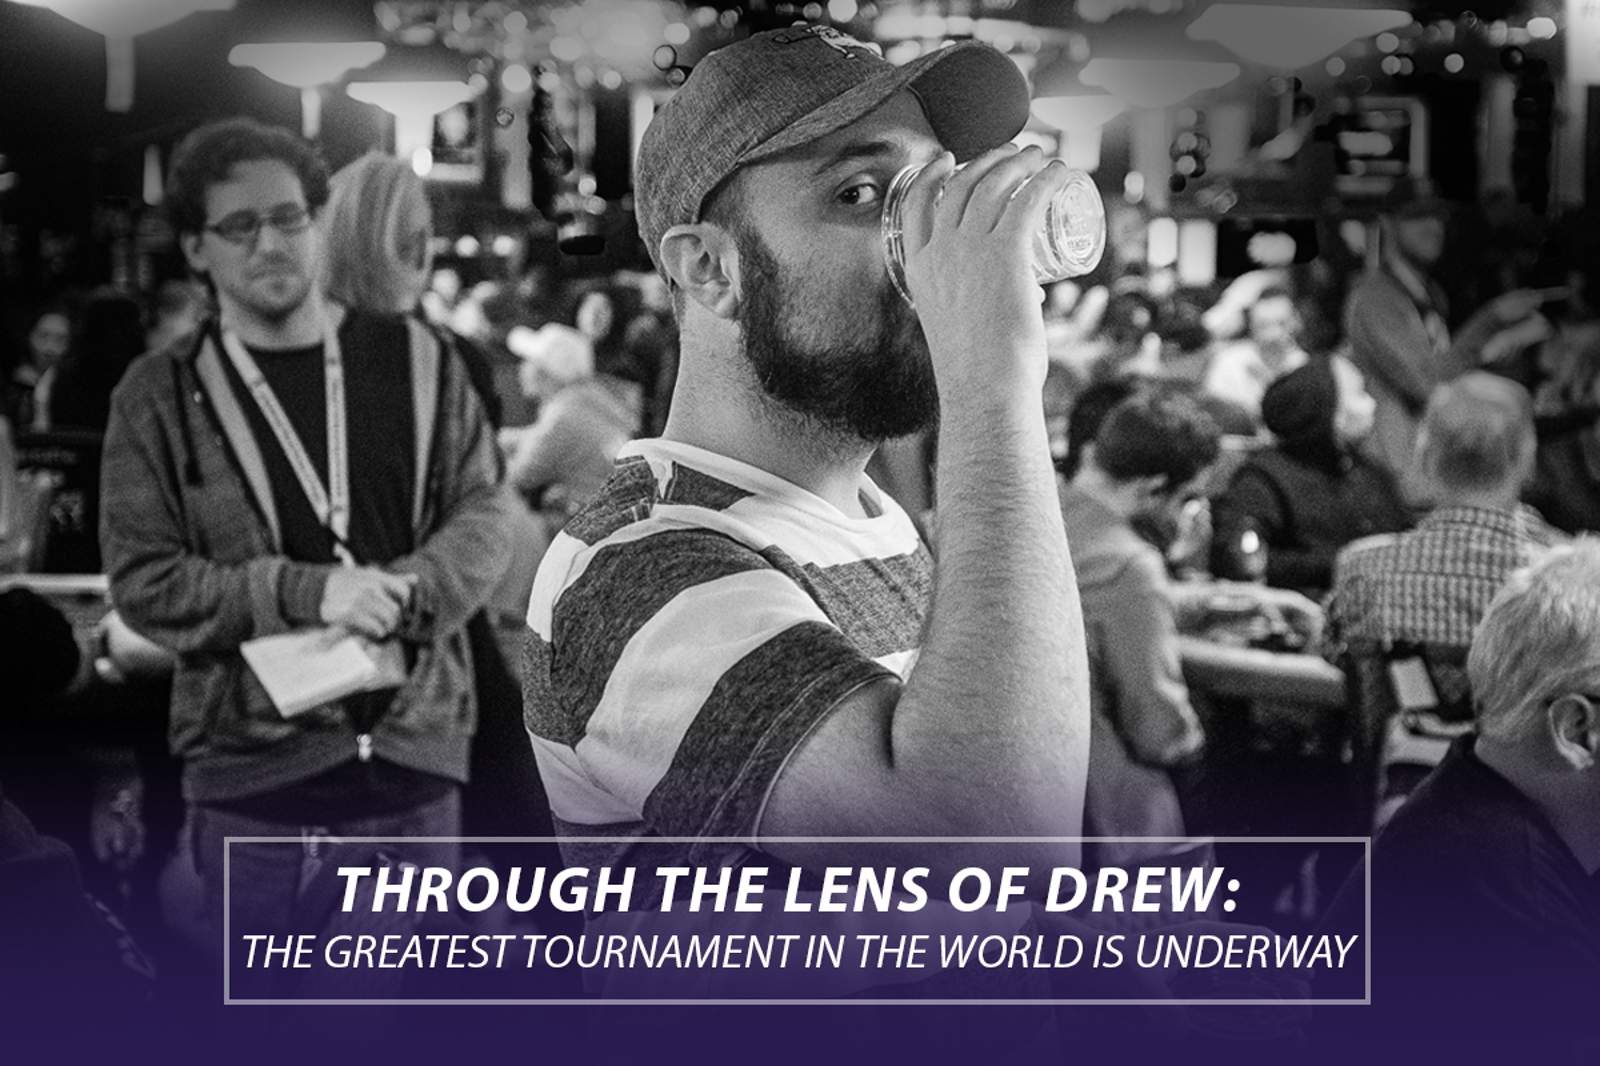 Through the Lens: The Greatest Tournament in the World is Underway